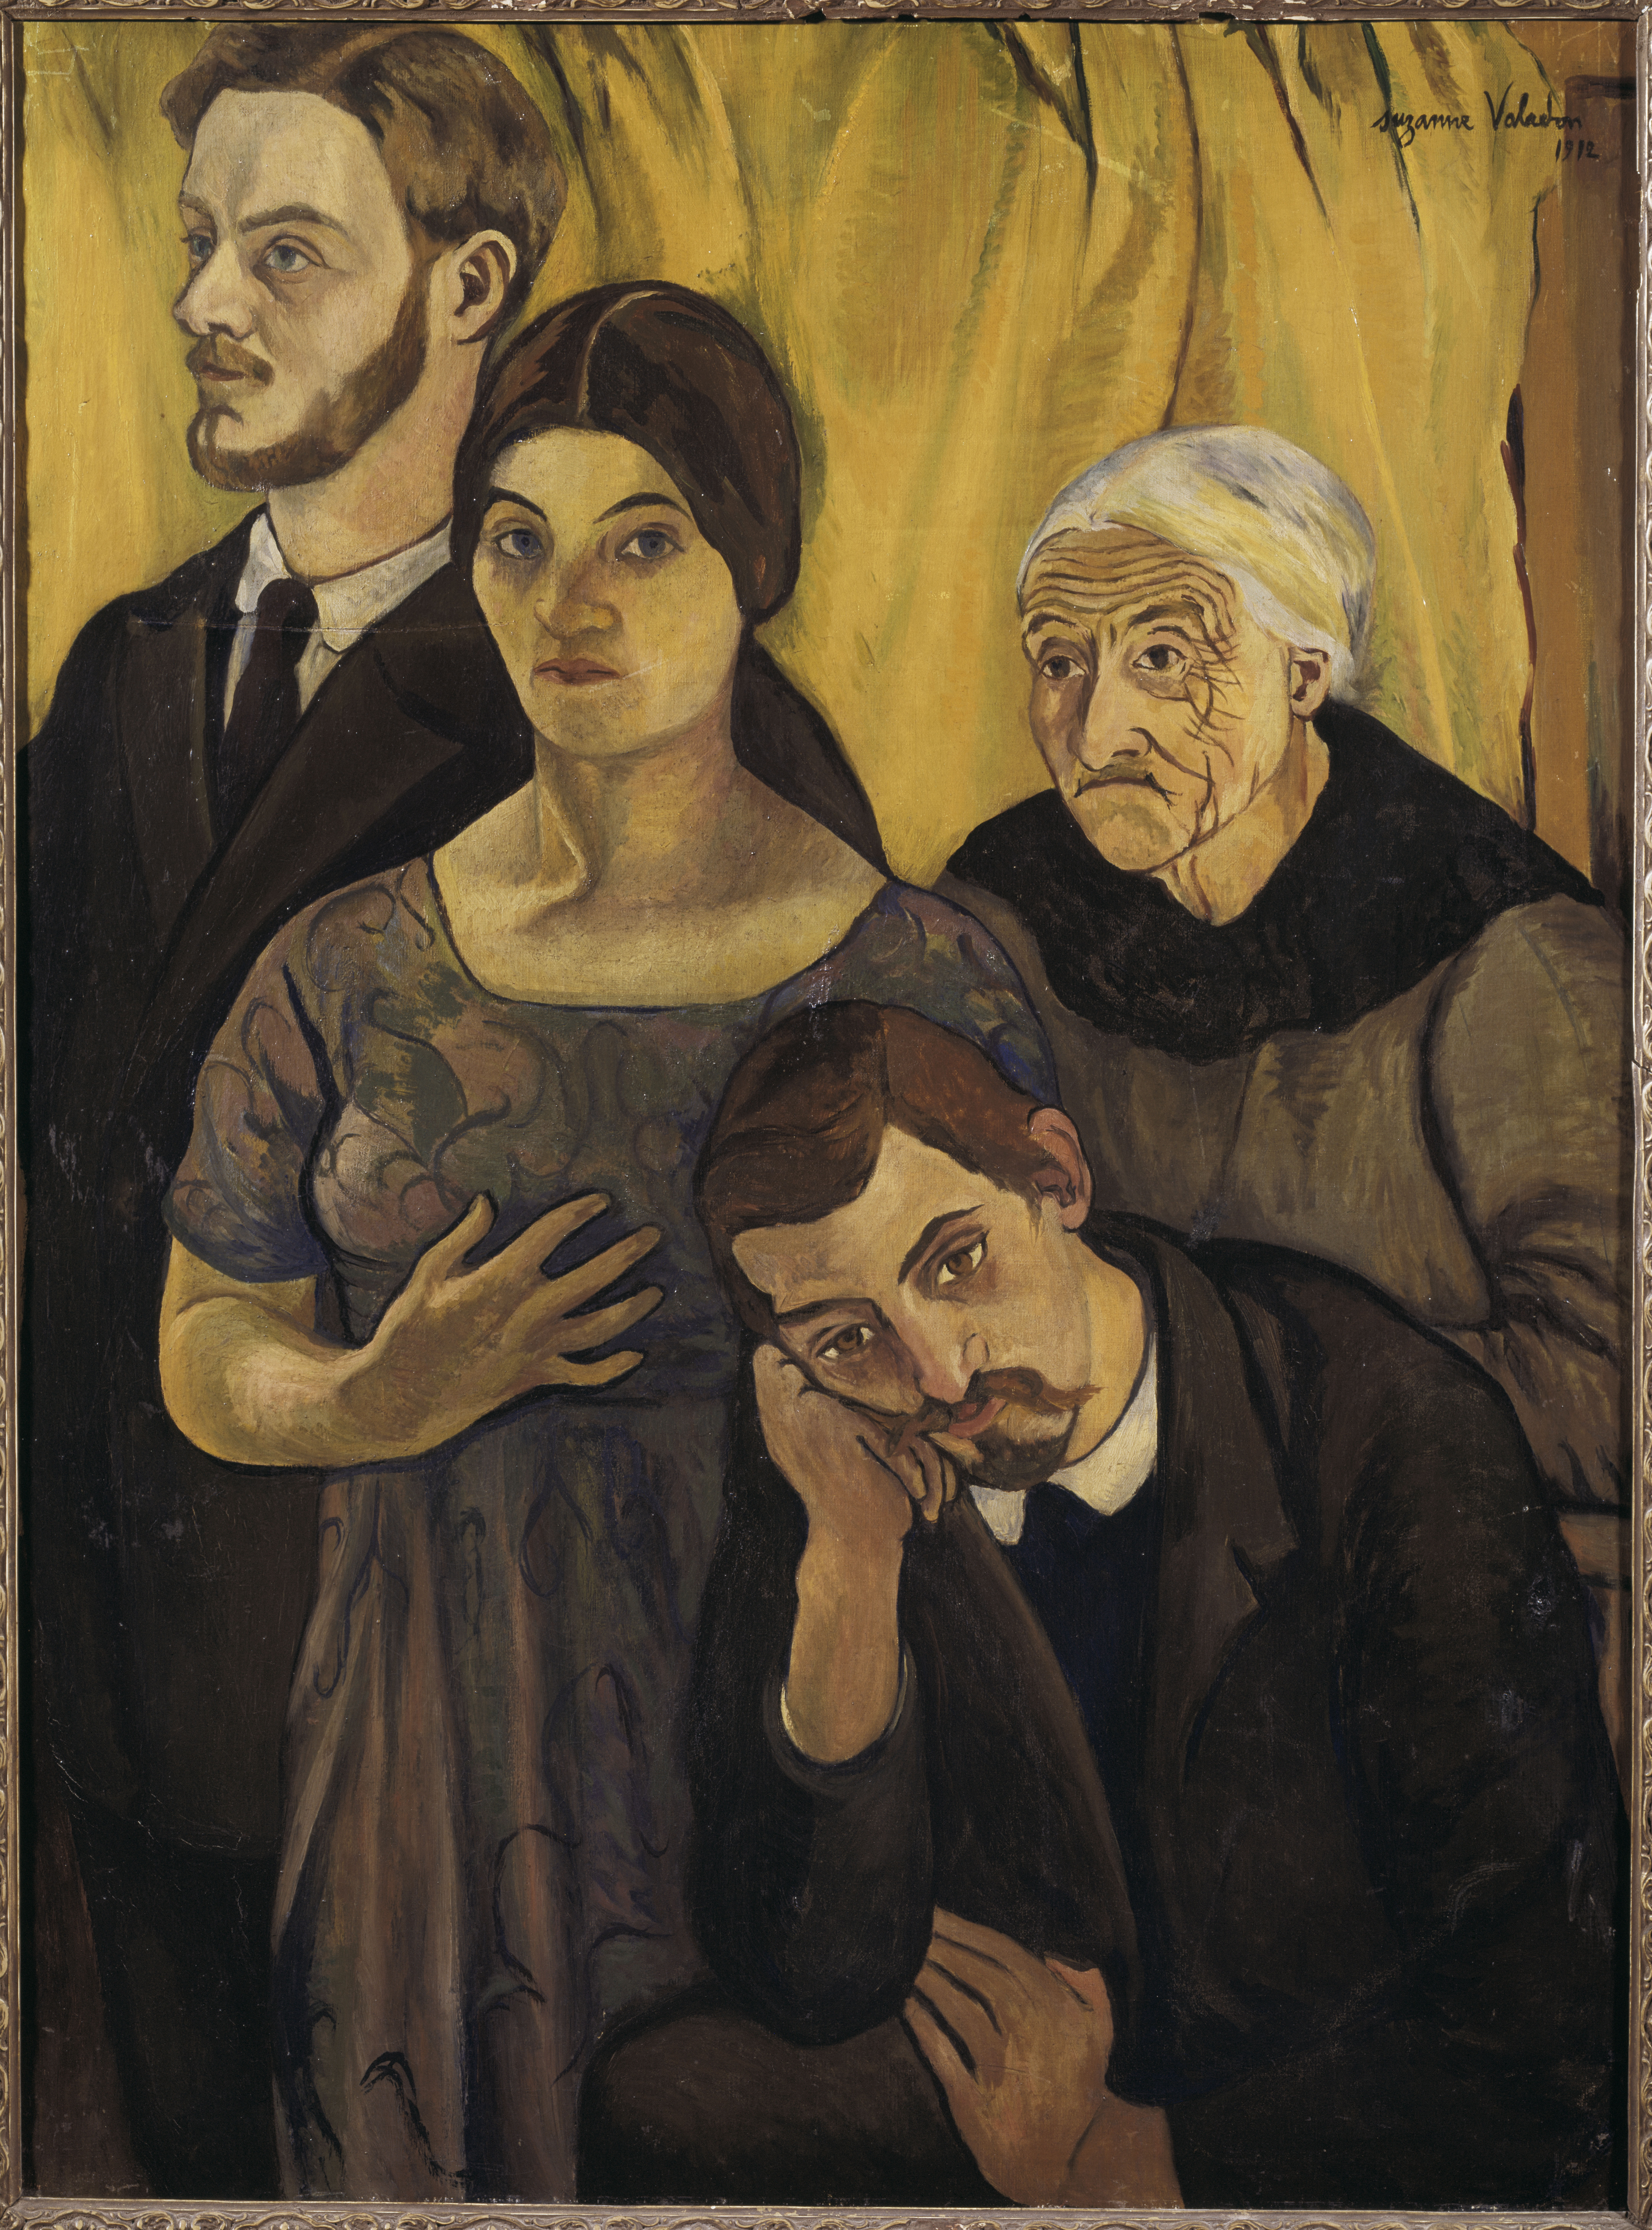 Suzanne Valadon, ‘Family Portrait,’ 1912. Musee d’Orsay, Paris, on deposit to the Centre Pompidou – Musee National d’Art Moderne/CCI, gift to the Musees Nationaux by M. Cahen-Salvador in memory of Madame Fontenelle-Pomaret, 1976. © 2021 Artist Rights Society (ARS), New York Photo by Christian Jean/Jean Popovitch/ Image © CNAC/MNAM, Dist. RMN-Grand Palais/Art Resource, NY